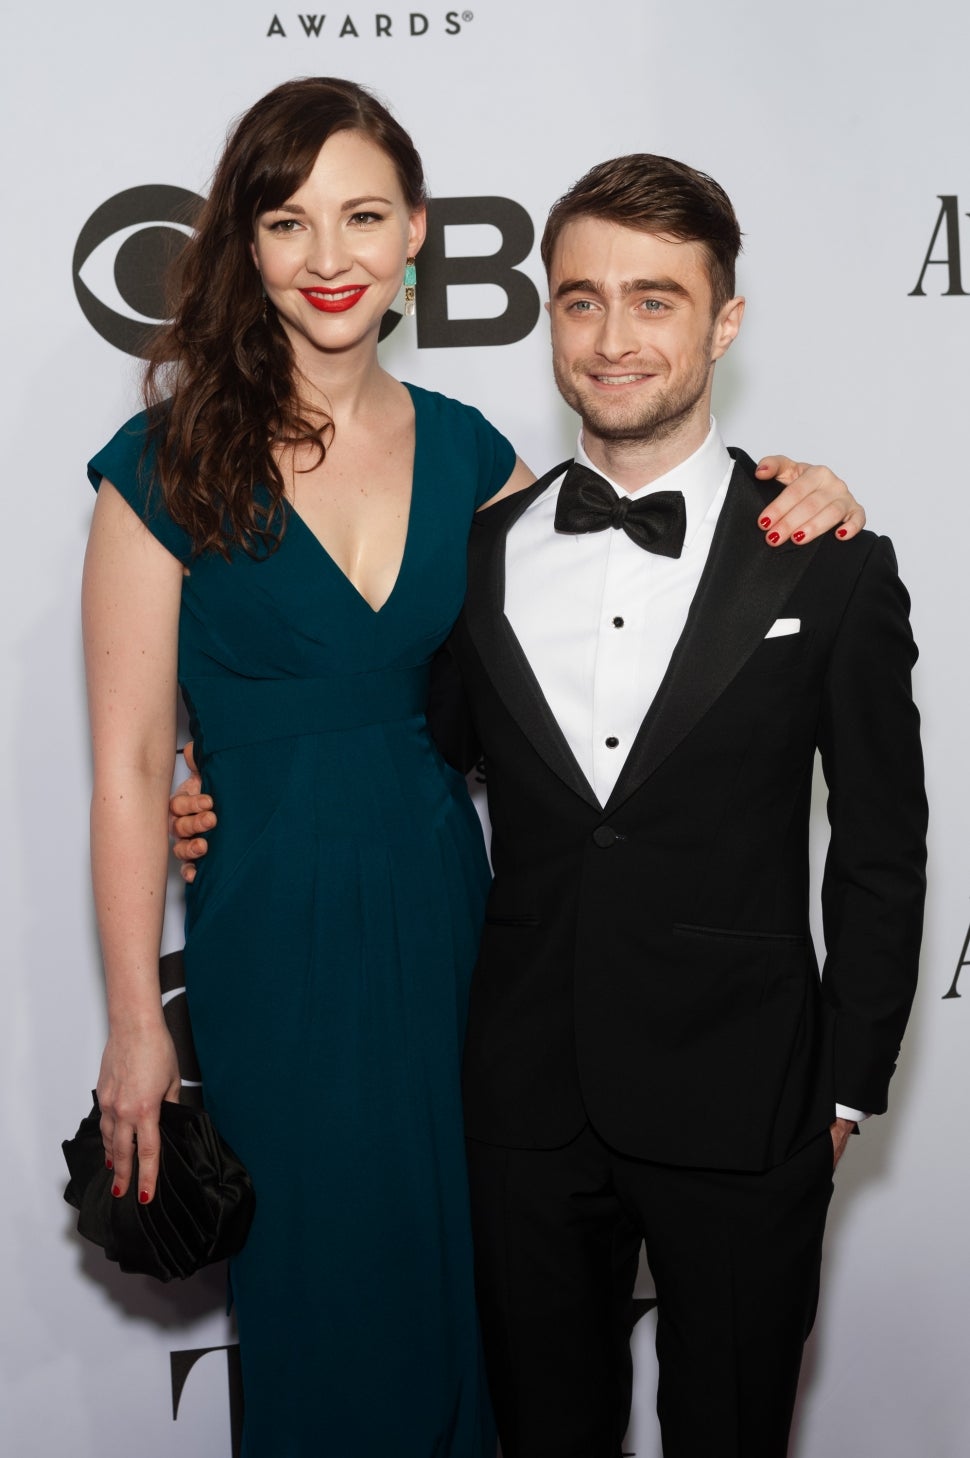 Daniel Radcliffe (R) and Erin Darke attend the American Theatre Wing's 68th Annual Tony Awards at Radio City Music Hall on June 8, 2014 in New York City.